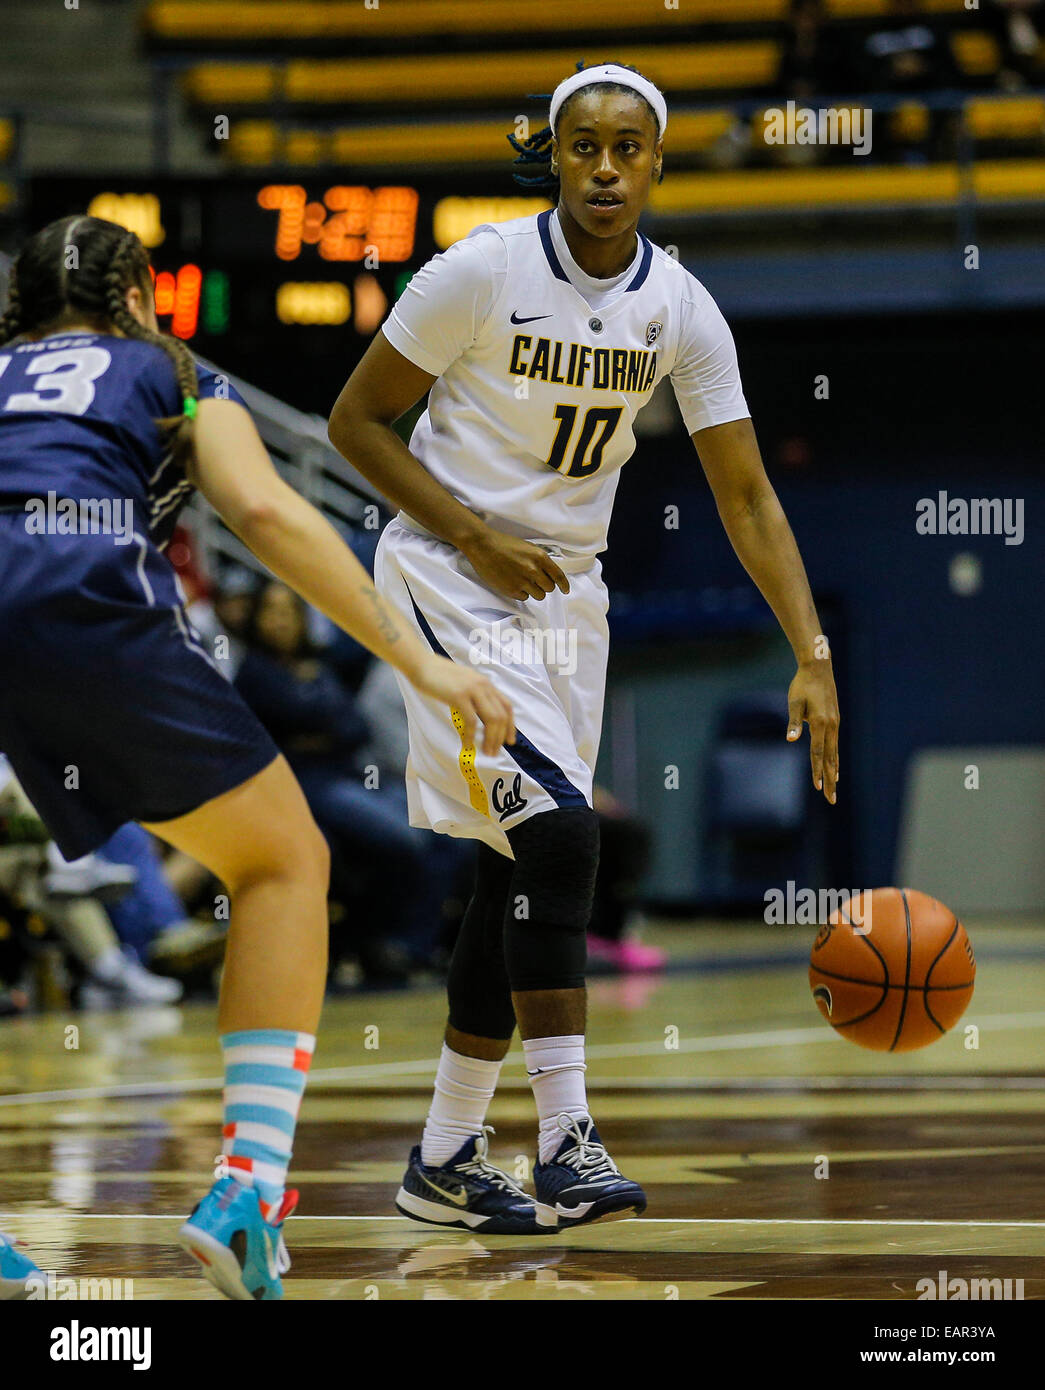 Berkeley CA. 18th Nov, 2014. California Bears G # 10 Mercedes Jefflo at mid court set up Cal offense during NCAA Women's Basketball game between Nevada Wolf Pack and California Golden Bears 76-54 win at Hass Pavilion Berkeley Calif. © csm/Alamy Live News Stock Photo